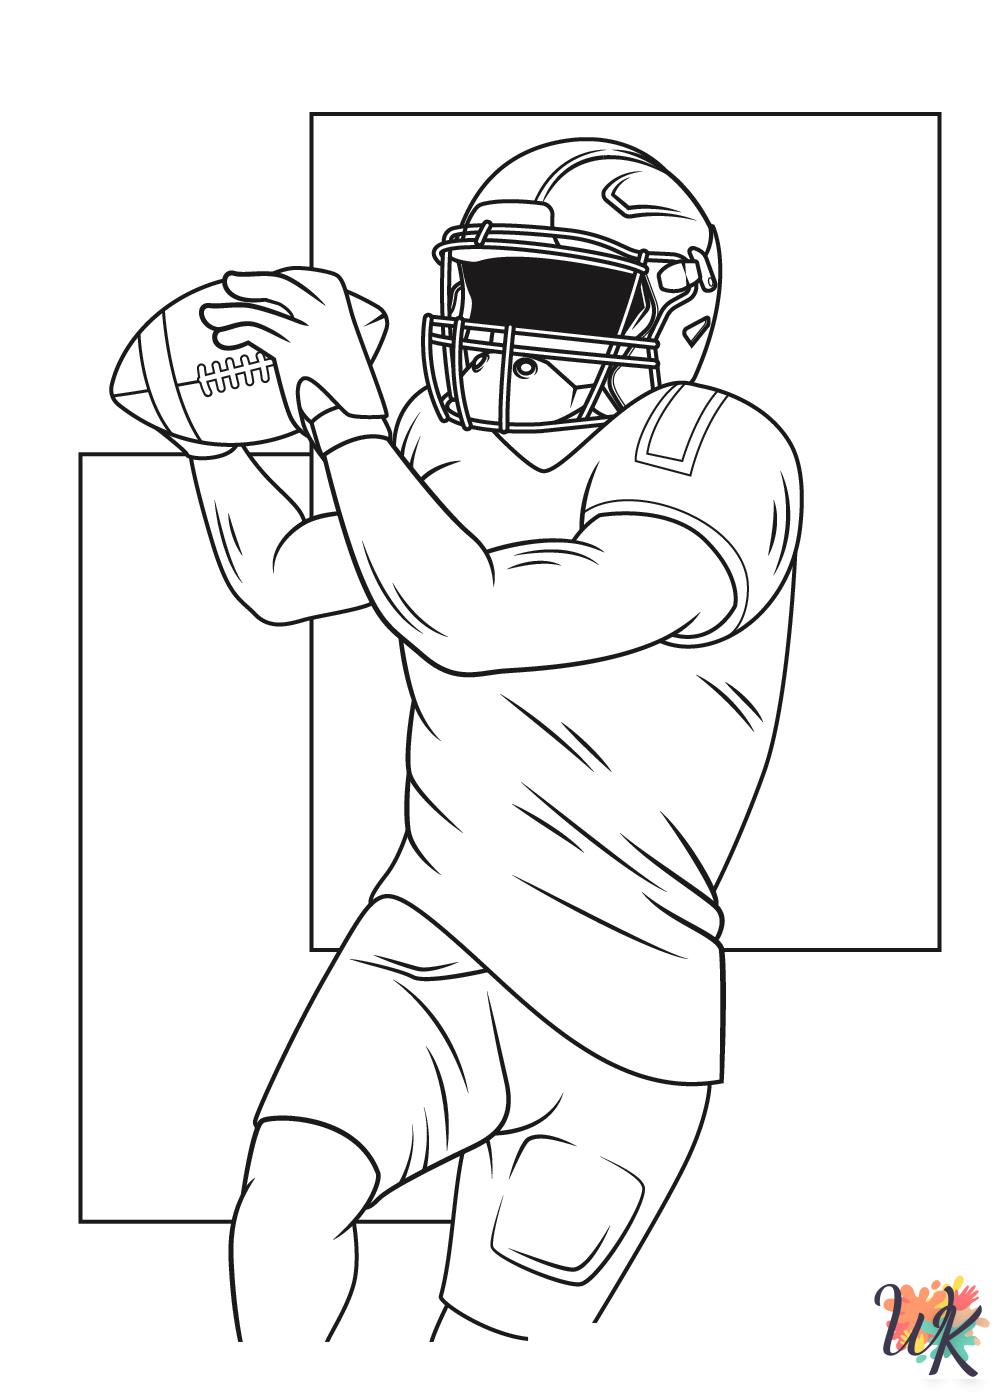 easy cute NFL coloring pages